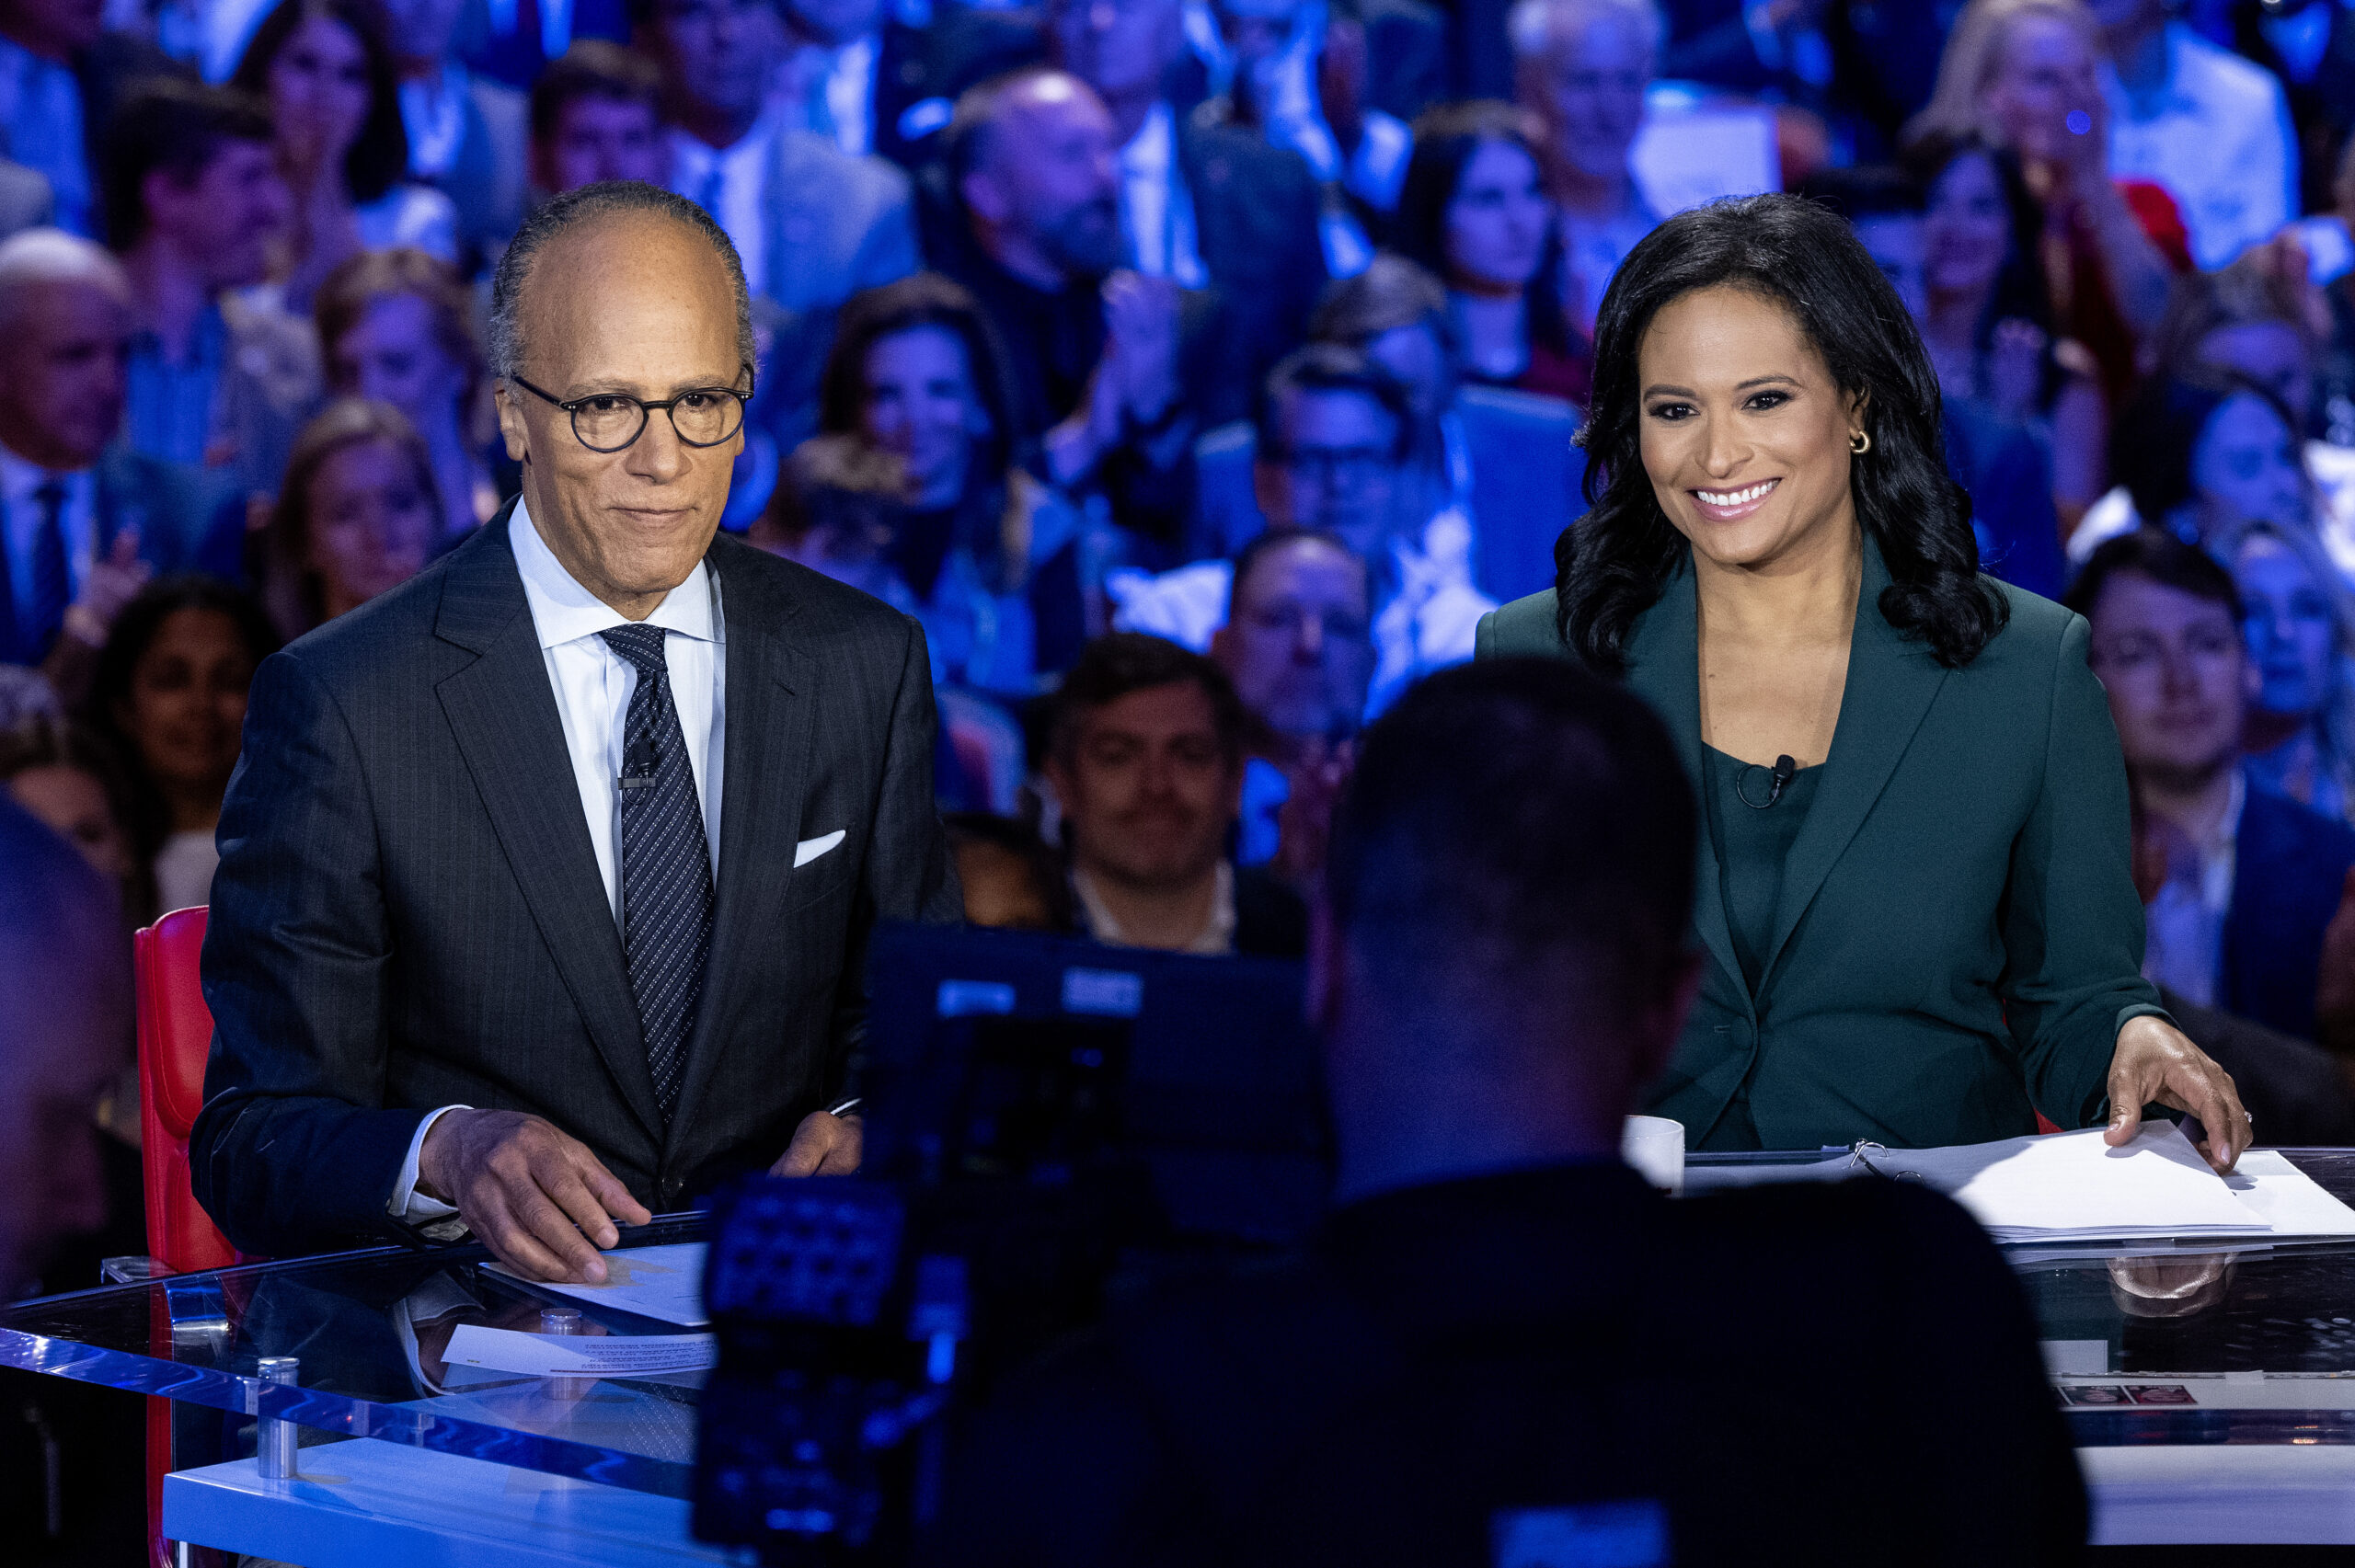 NBC NEWS DELIVERS MOST-WATCHED PROGRAM WEDNESDAY NIGHT WITH OVER 7.5 MILLION VIEWERS FOR THE REPUBLICAN PRIMARY DEBATE